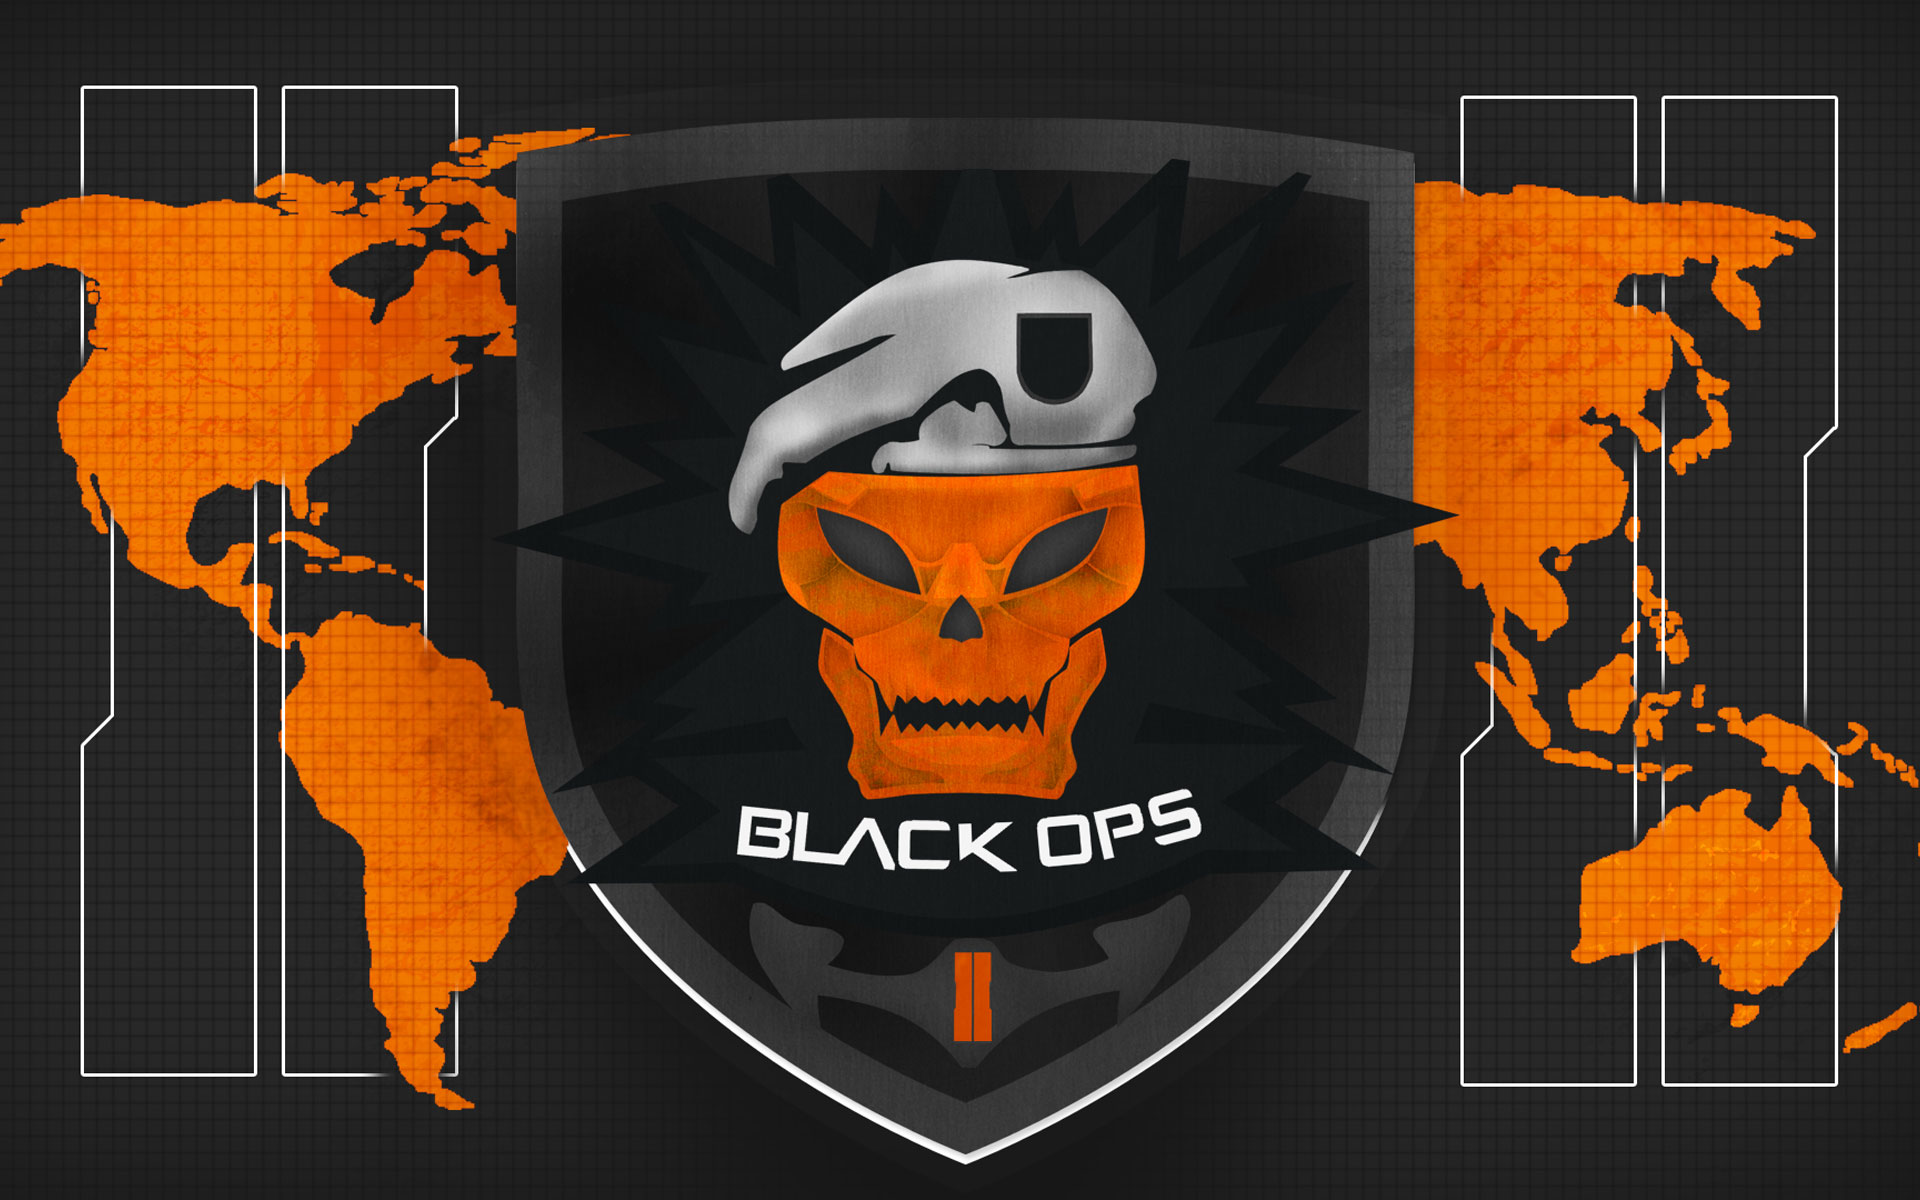 Black Ops 2 Wallpaper for Download 1920x1200